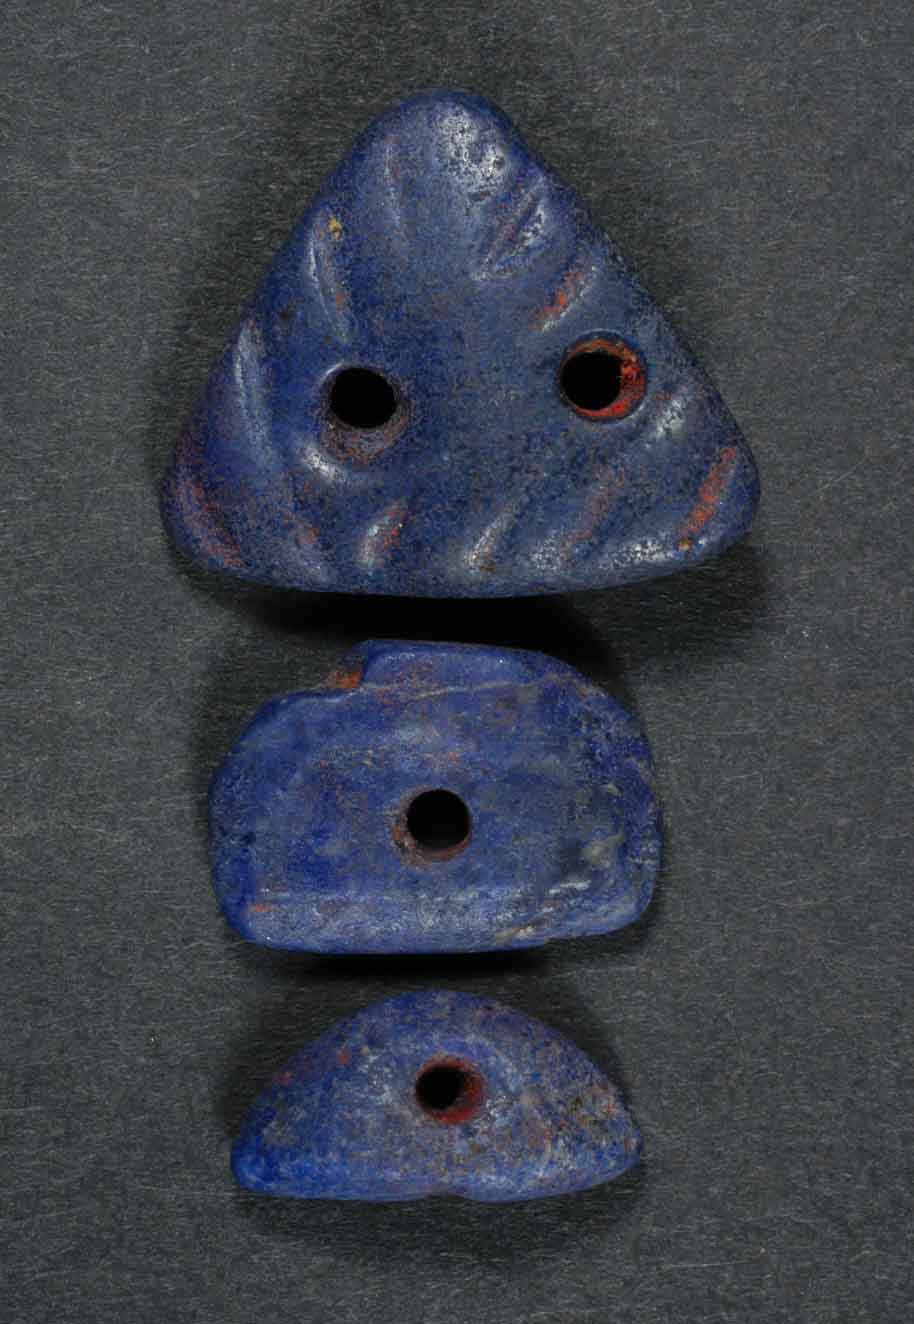 4_Early_Bronze_Age_3300-2000_BC_Sumerian_Lapis_Lazuli_bird_pendants,_representing_Anzu,_the_lion-heded_eagle,_also_known_as_Imdugud_from_the_Mesopotamian_mythology._Mid-3rd_millennium_BC.3.jpg (108.5 KB)